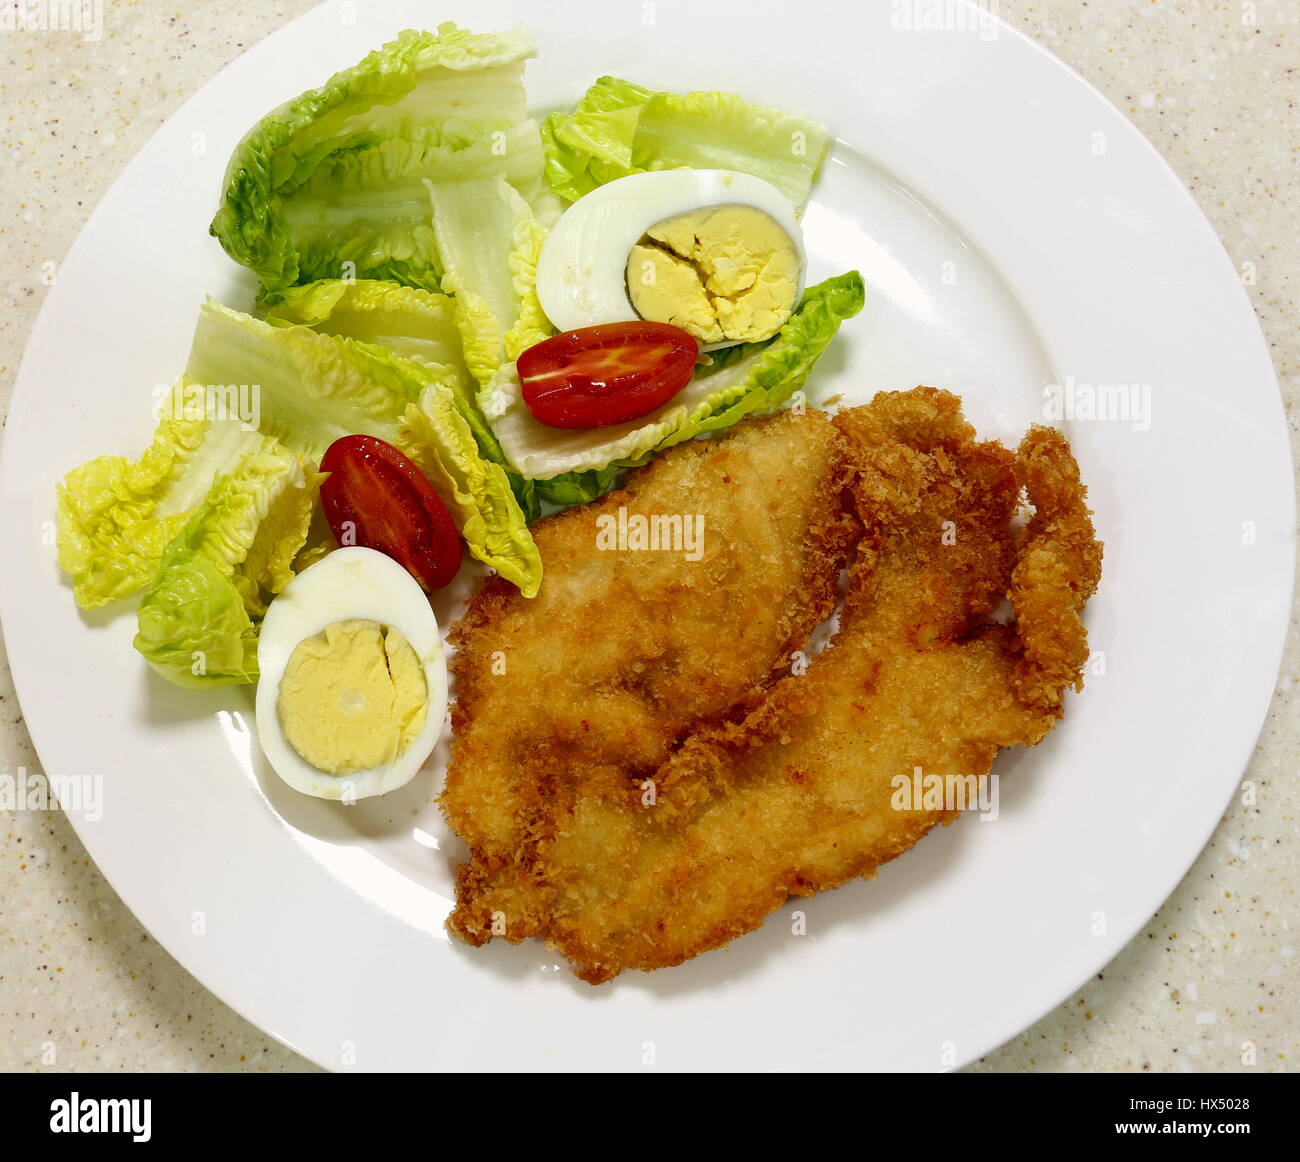 Breaded chicken breast fillet with a salad of lettuce, tomato and hard-boiled egg, top view Stock Photo